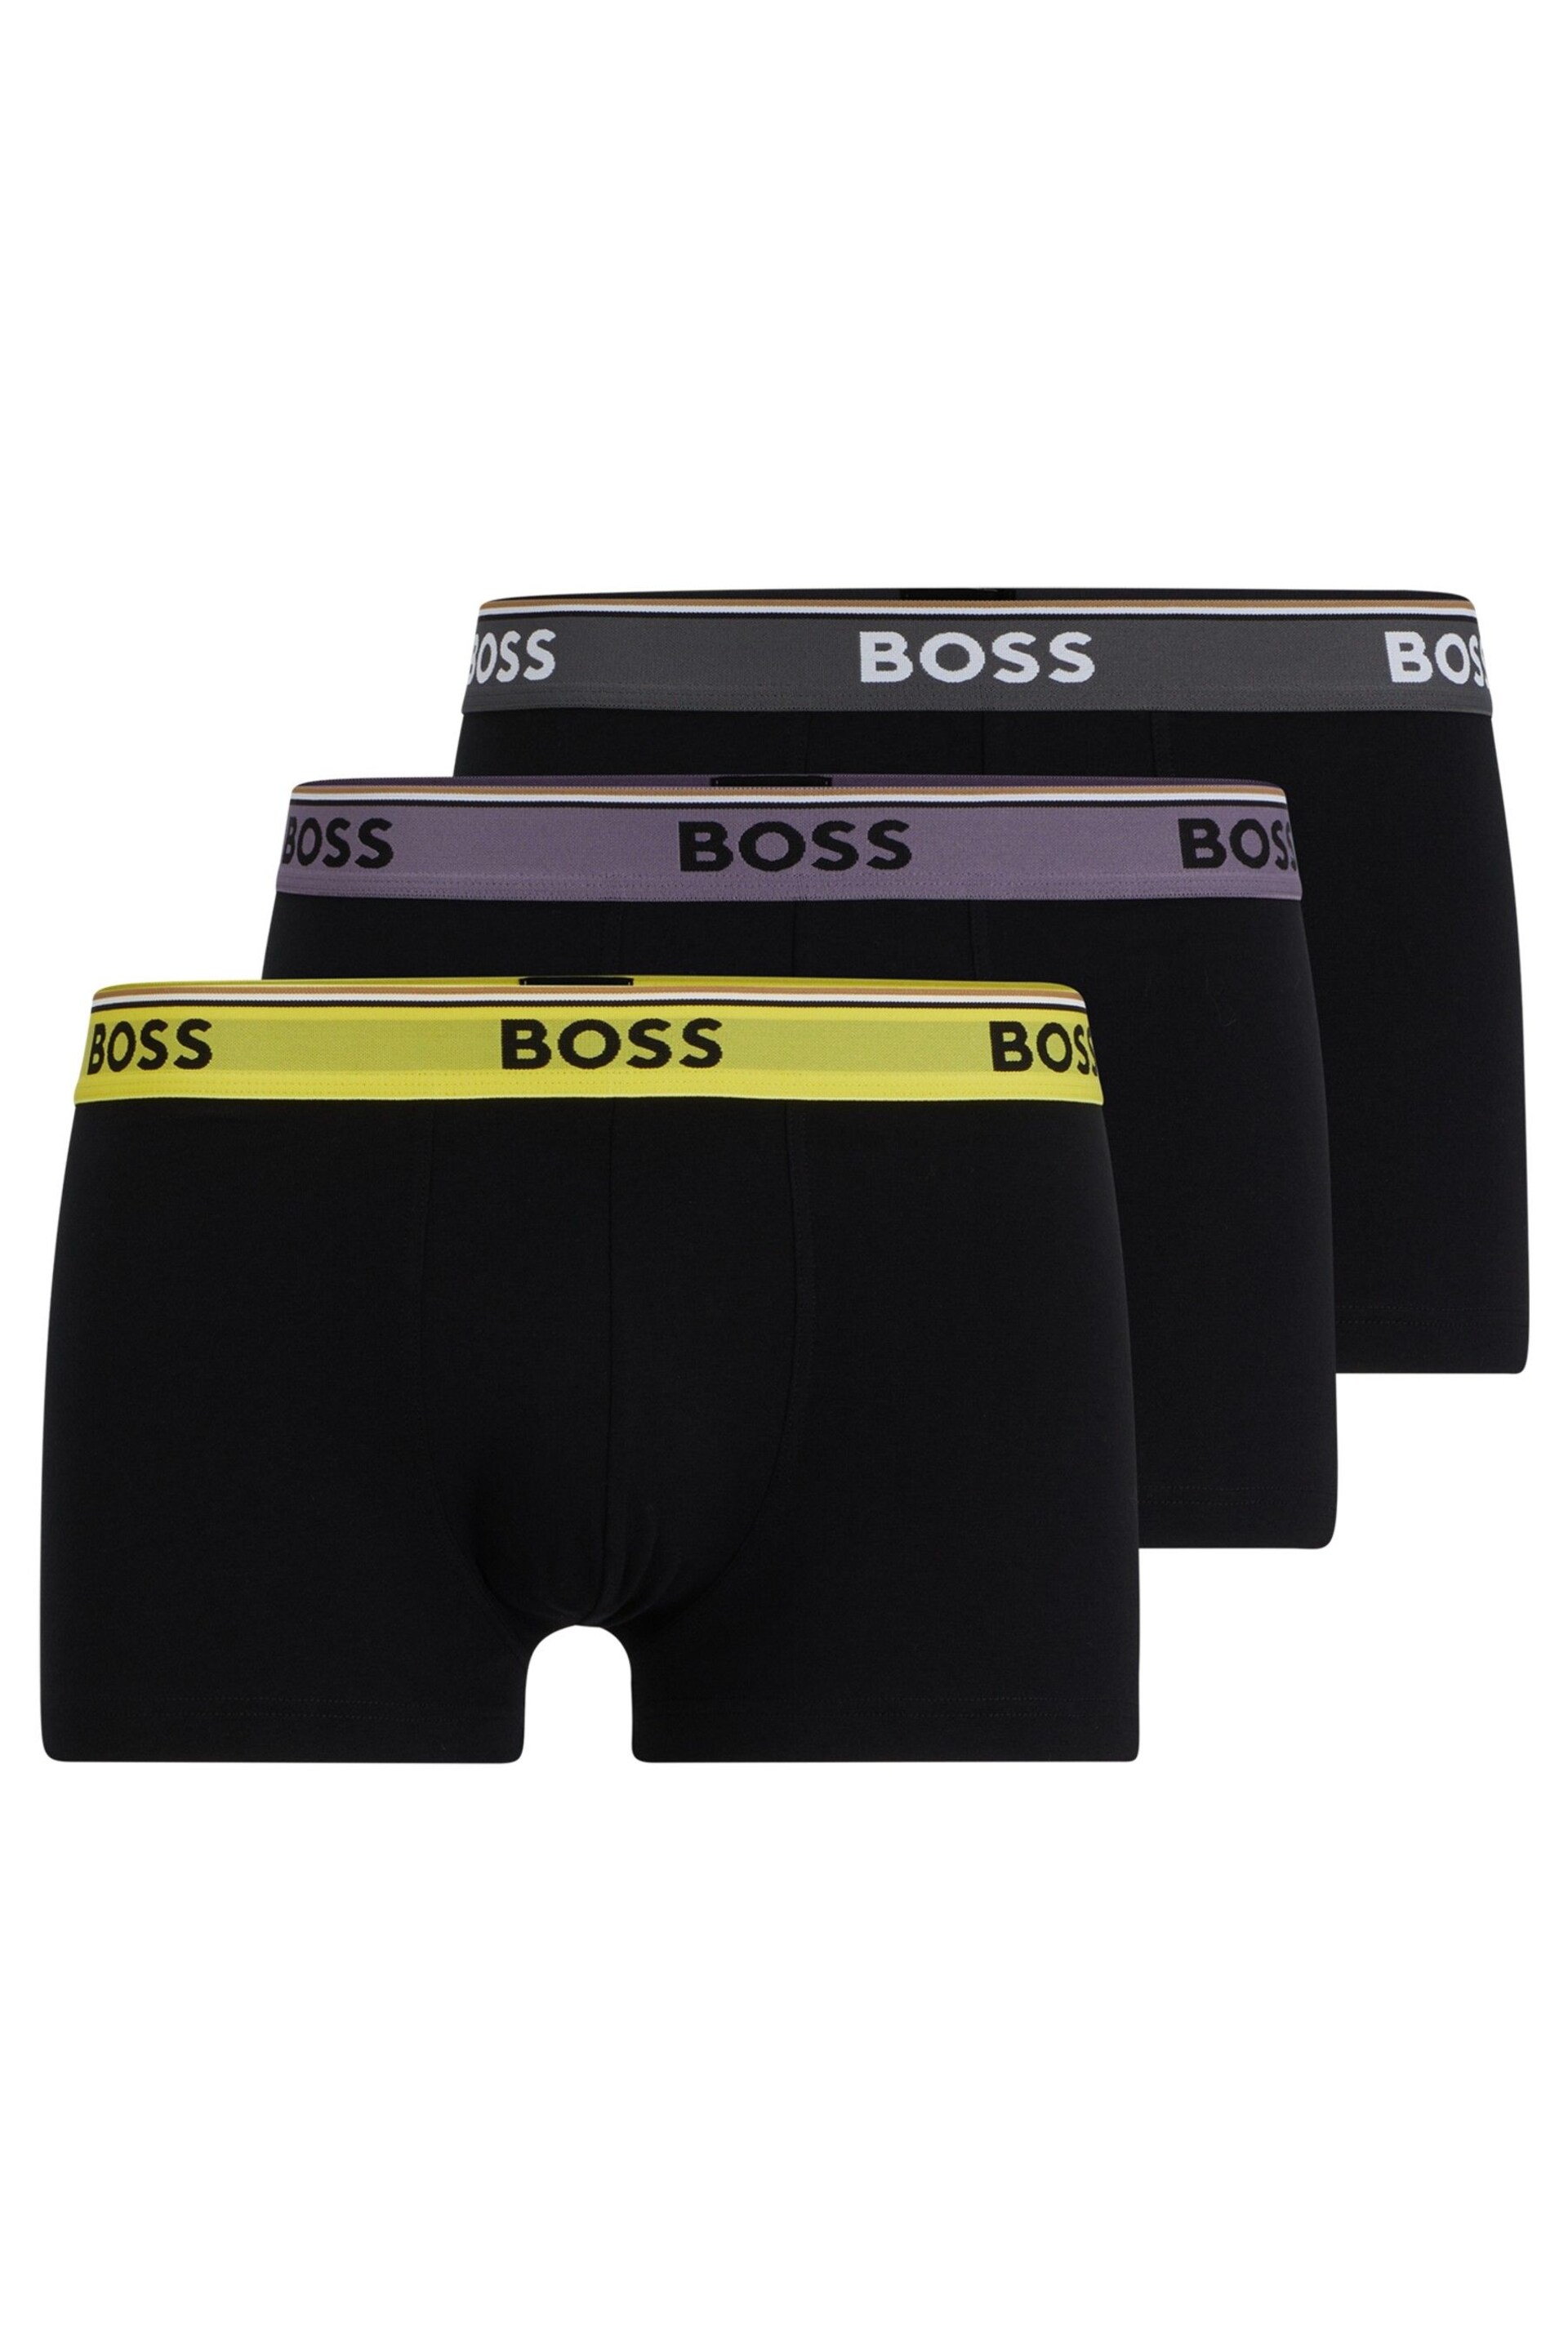 BOSS Black/Grey Stretch Cotton Trunks With Logo Waistbands 3PK - Image 1 of 6